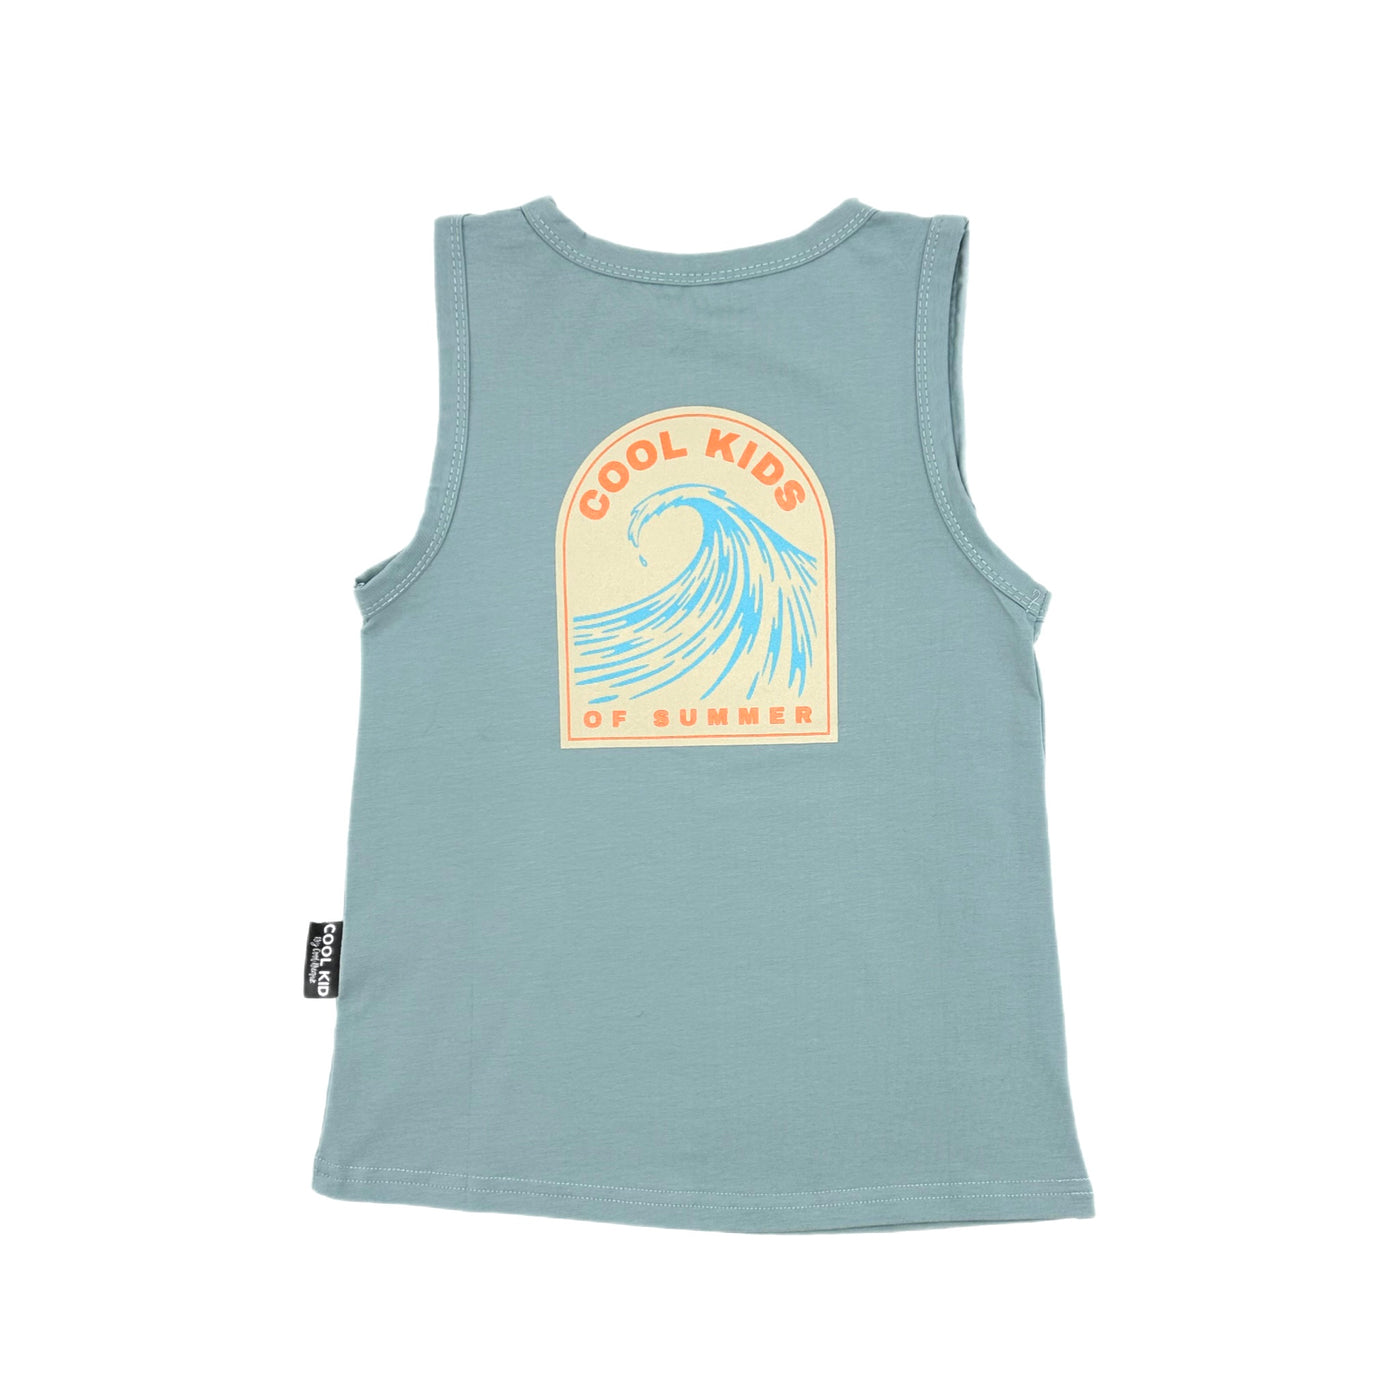 Cool Kids of Summer Muscle Tank